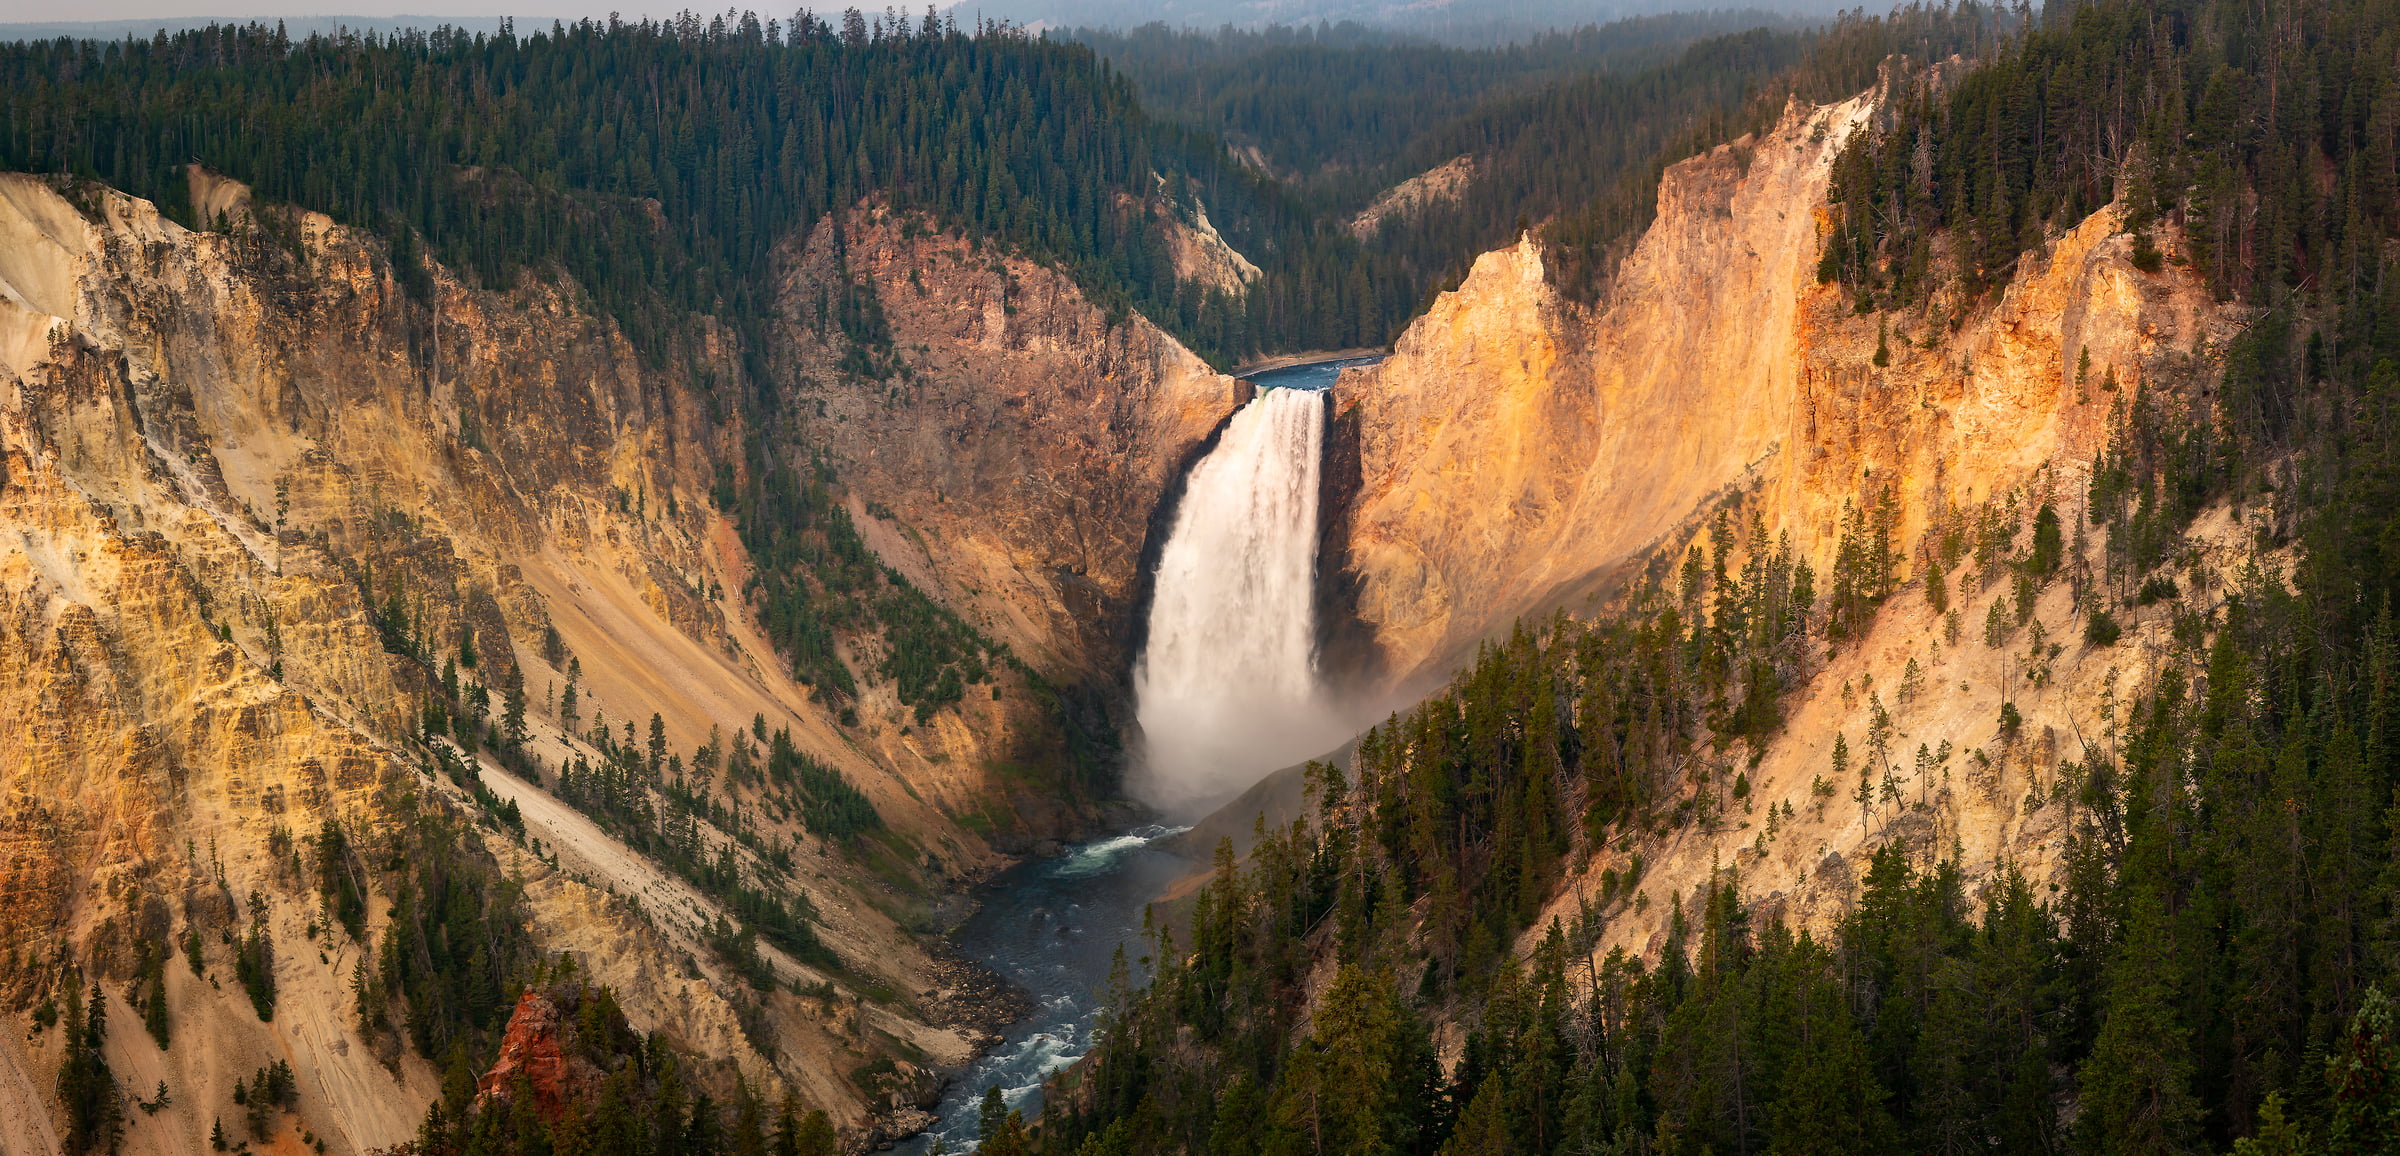 211 megapixels! A very high resolution, large-format VAST photo print of the Grand Canyon of the Yellowstone with the lower falls; landscape photograph created by Phillip Noll in Yellowstone National Park, WY.